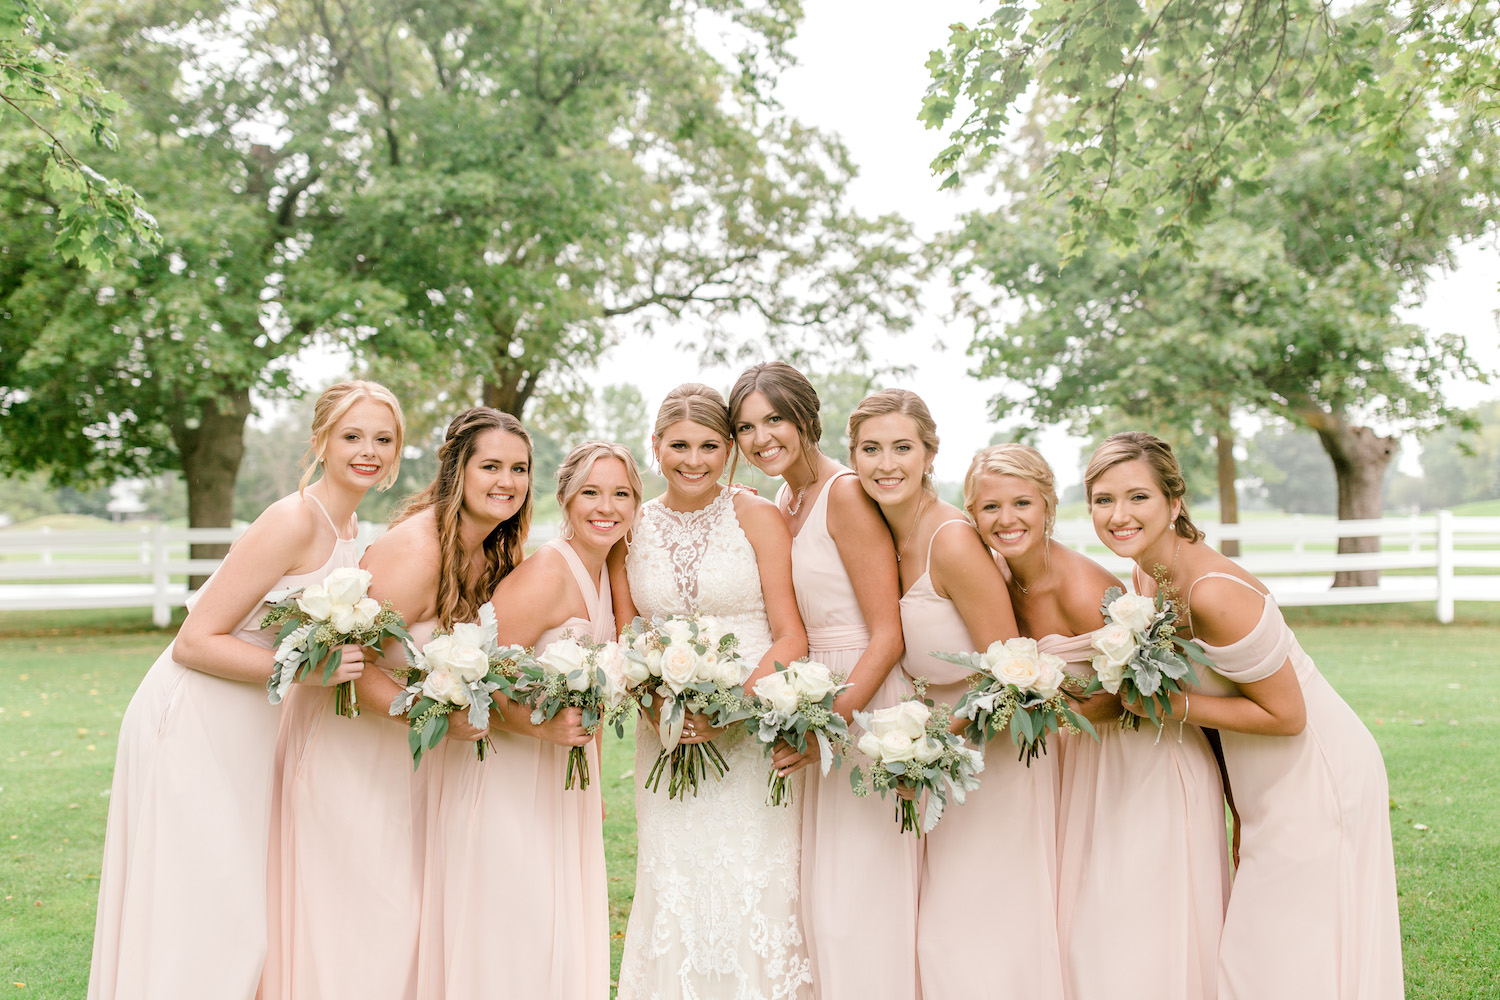 Bridesmaids standing with bride at Wallinwood Springs Golf Course wedding